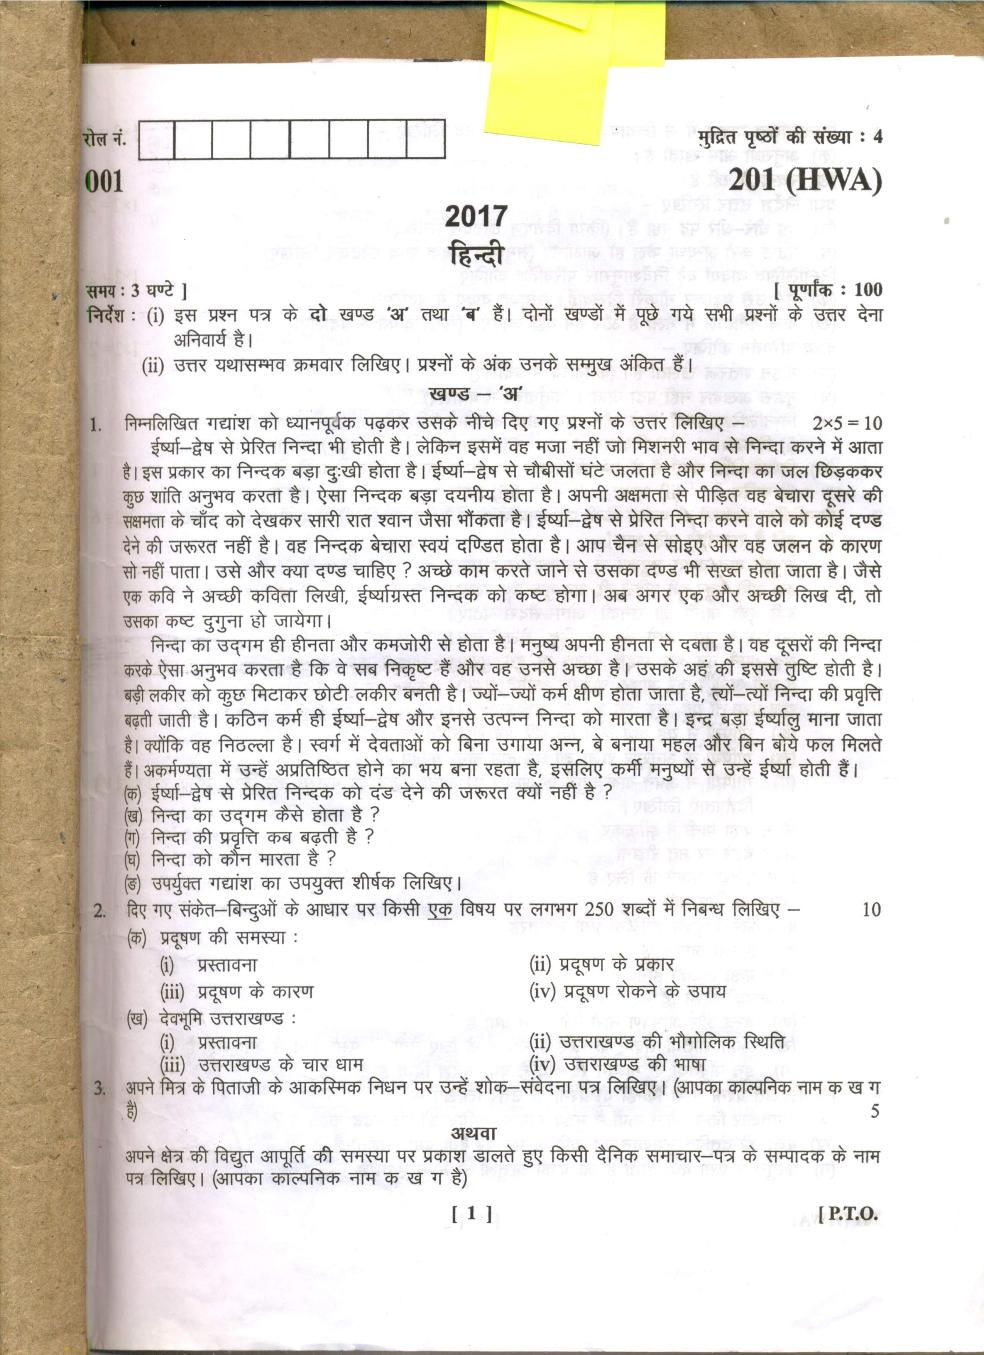 Uttarakhand Board Class 10 Question Paper 2017 for Hindi - Page 1